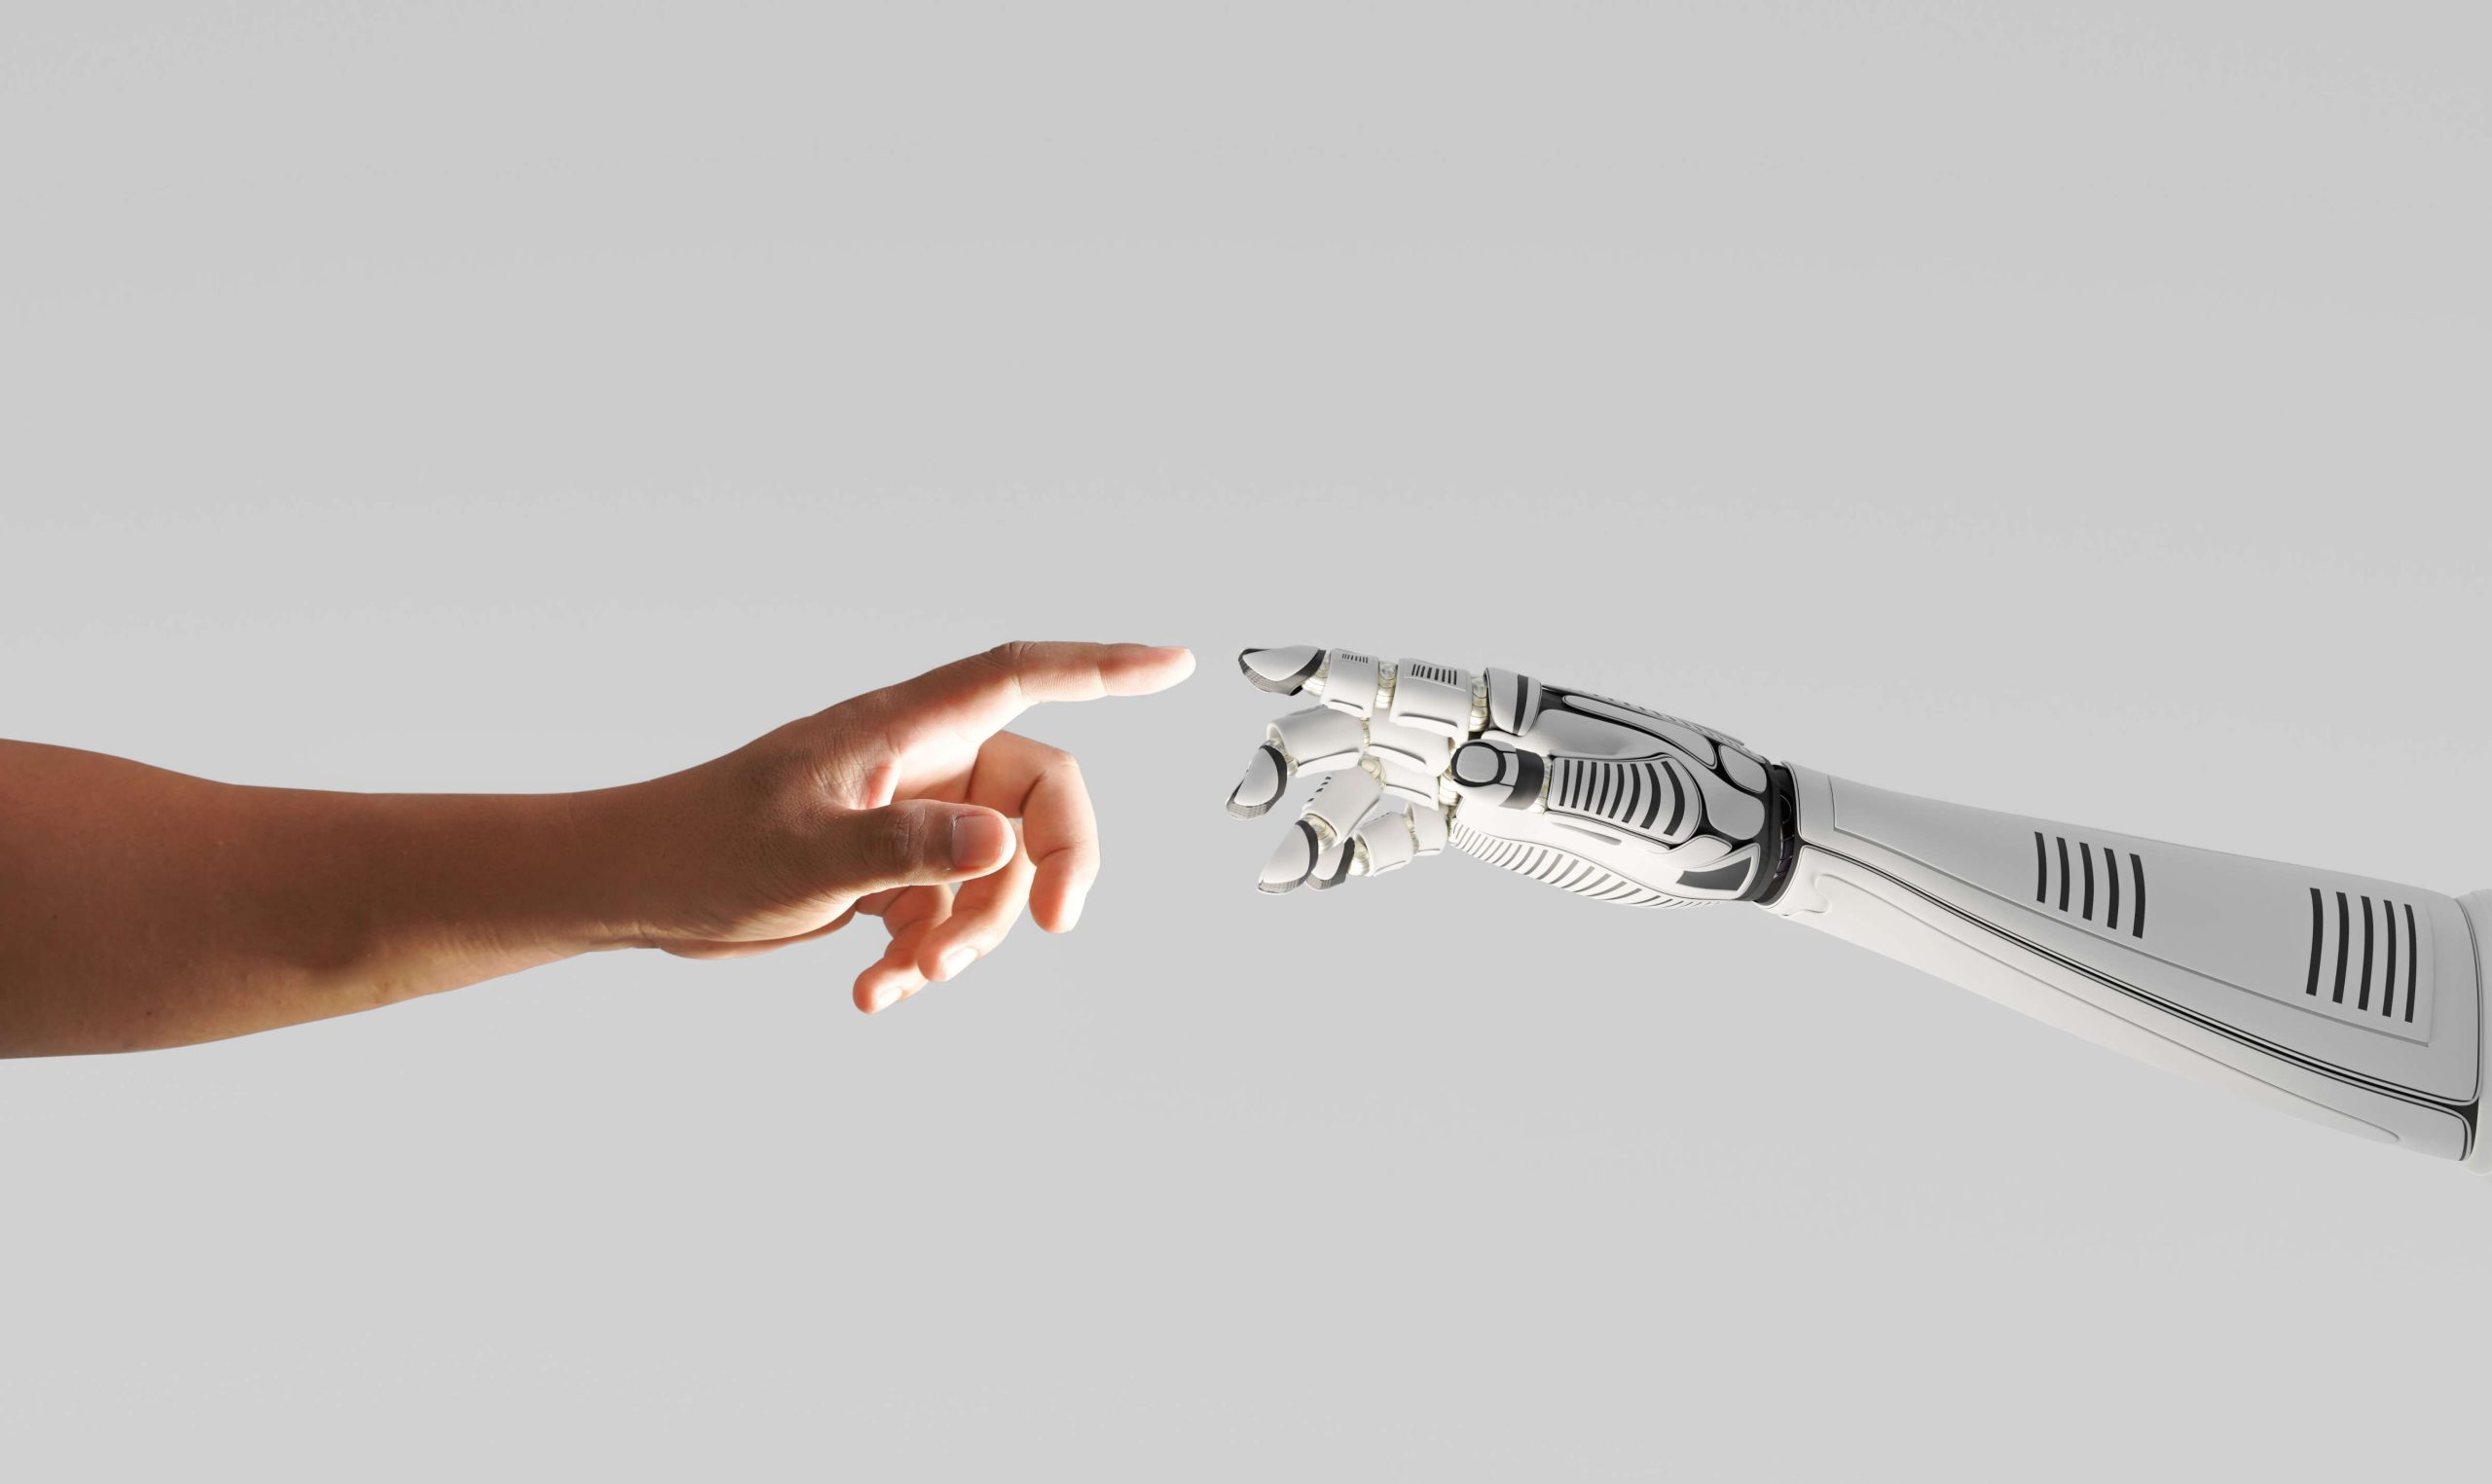 A human hand and a Robot arm touching